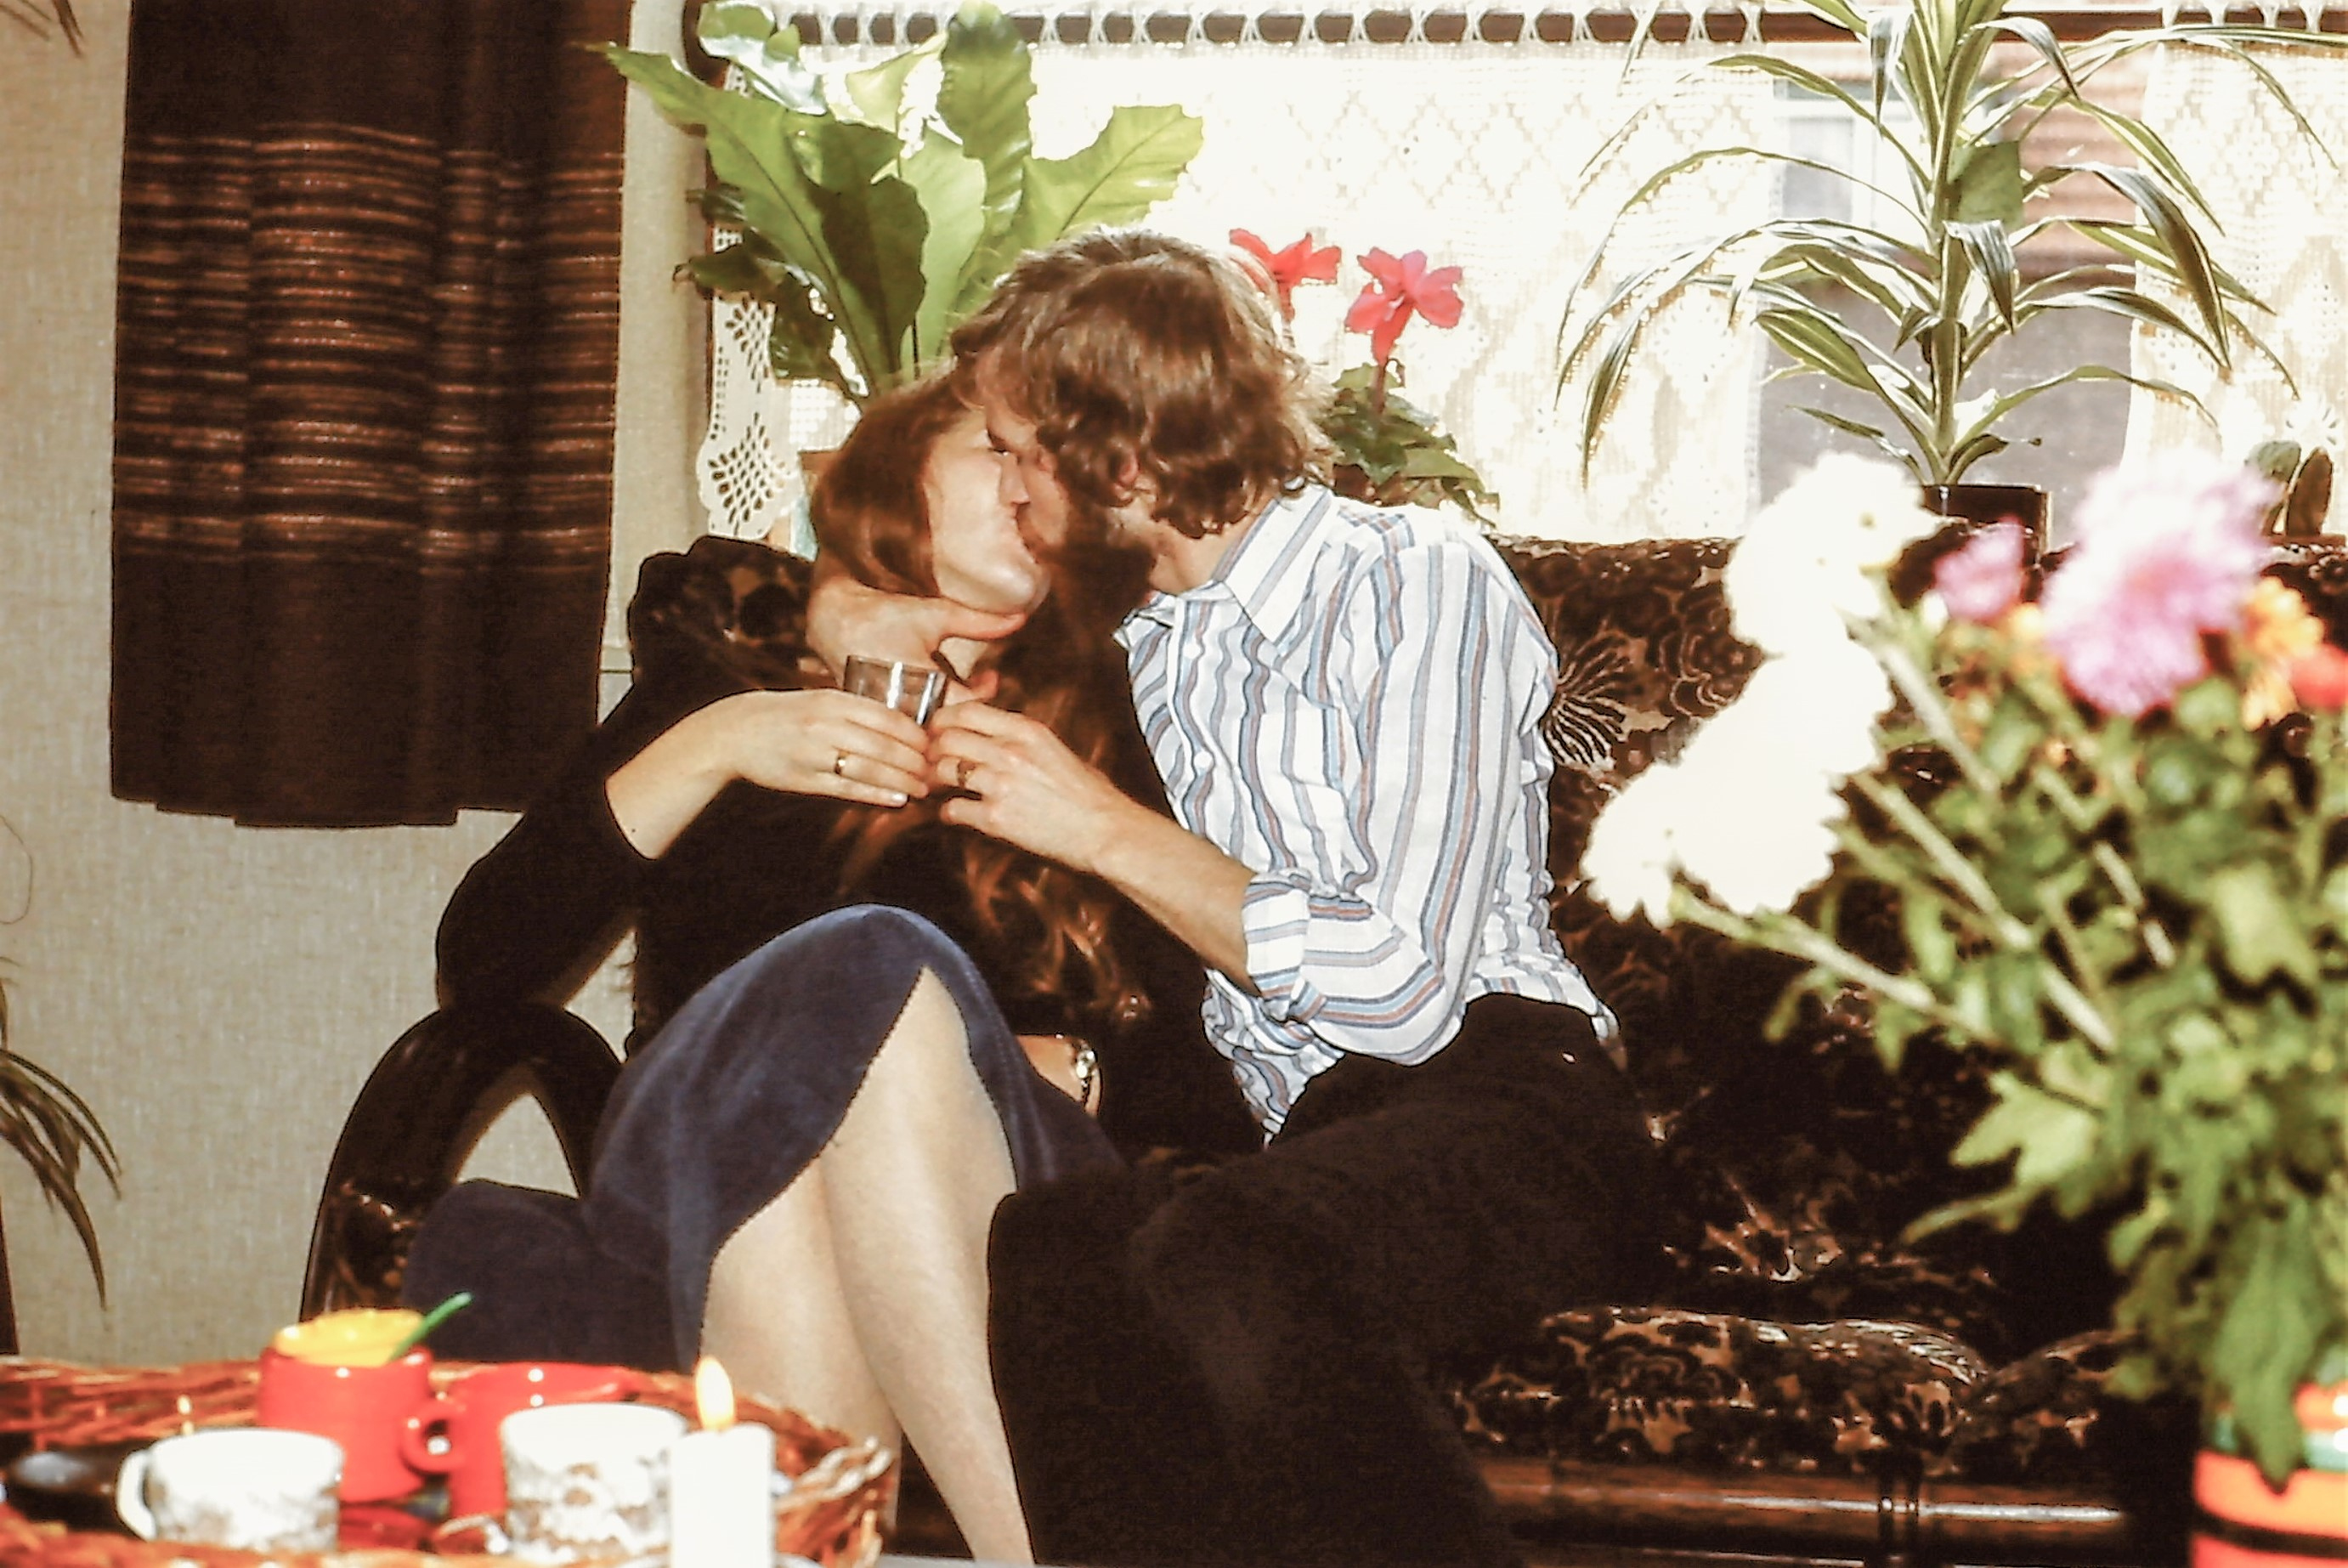 Two people sharing a kiss on a couch, surrounded by houseplants and a window in the background